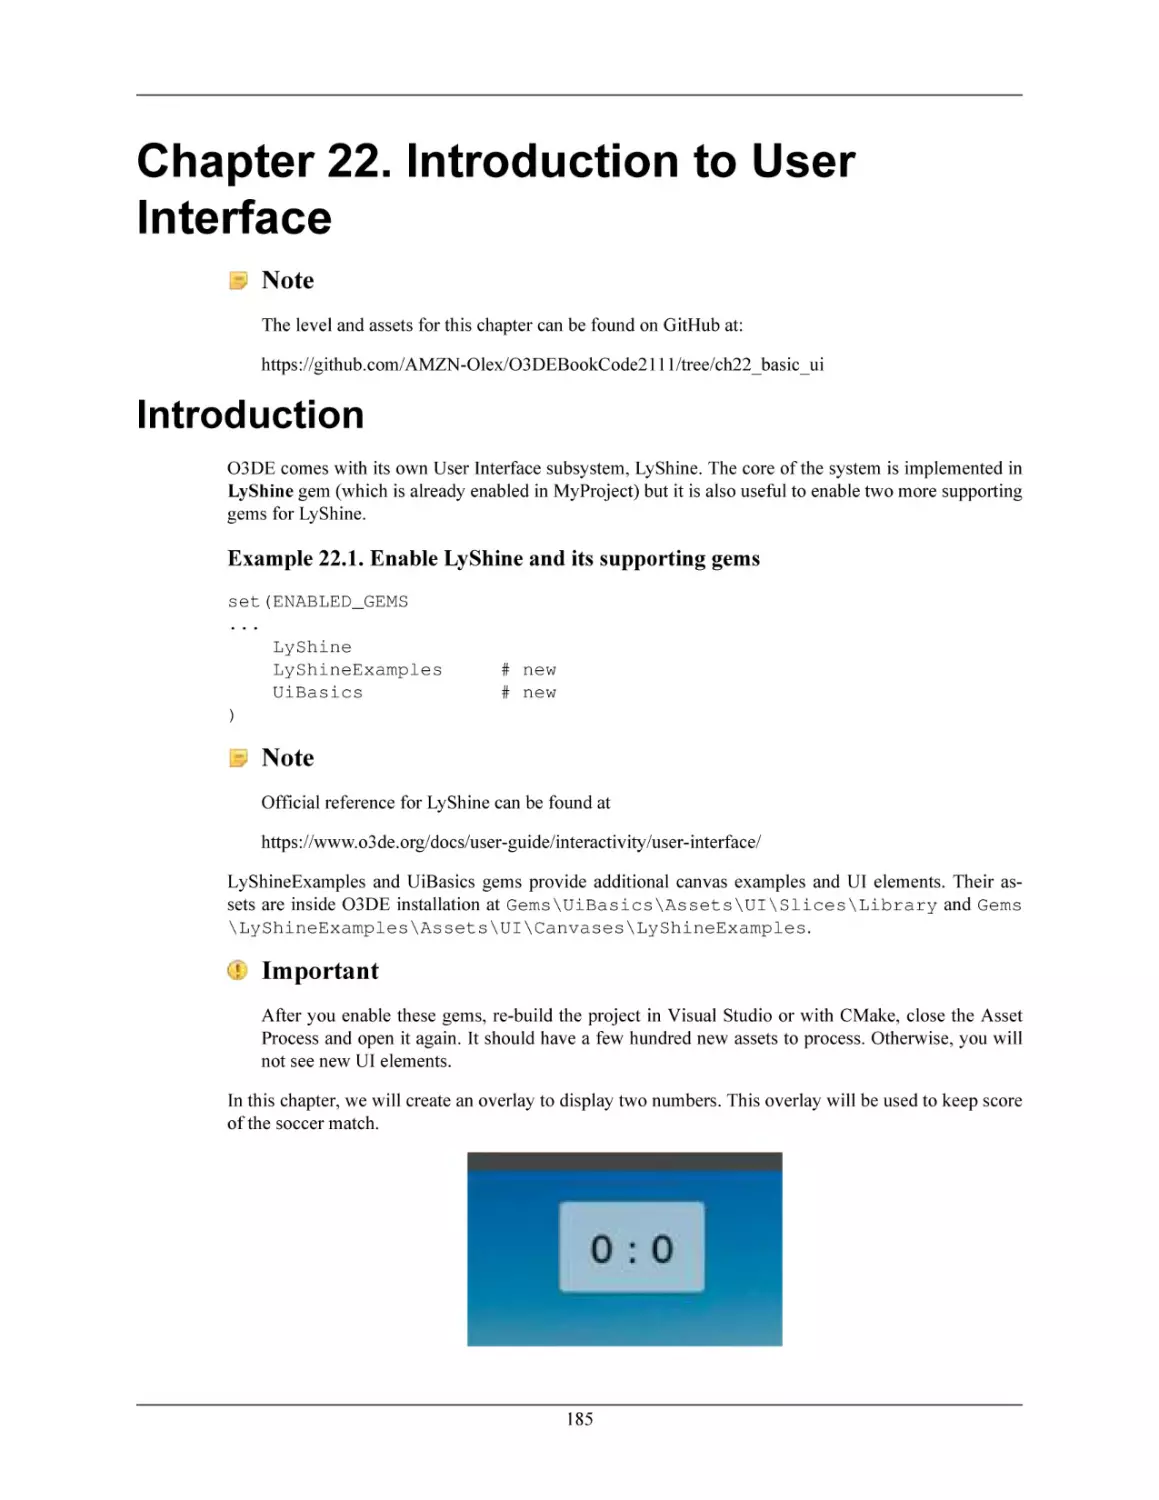 Chapter 22. Introduction to User Interface
Introduction